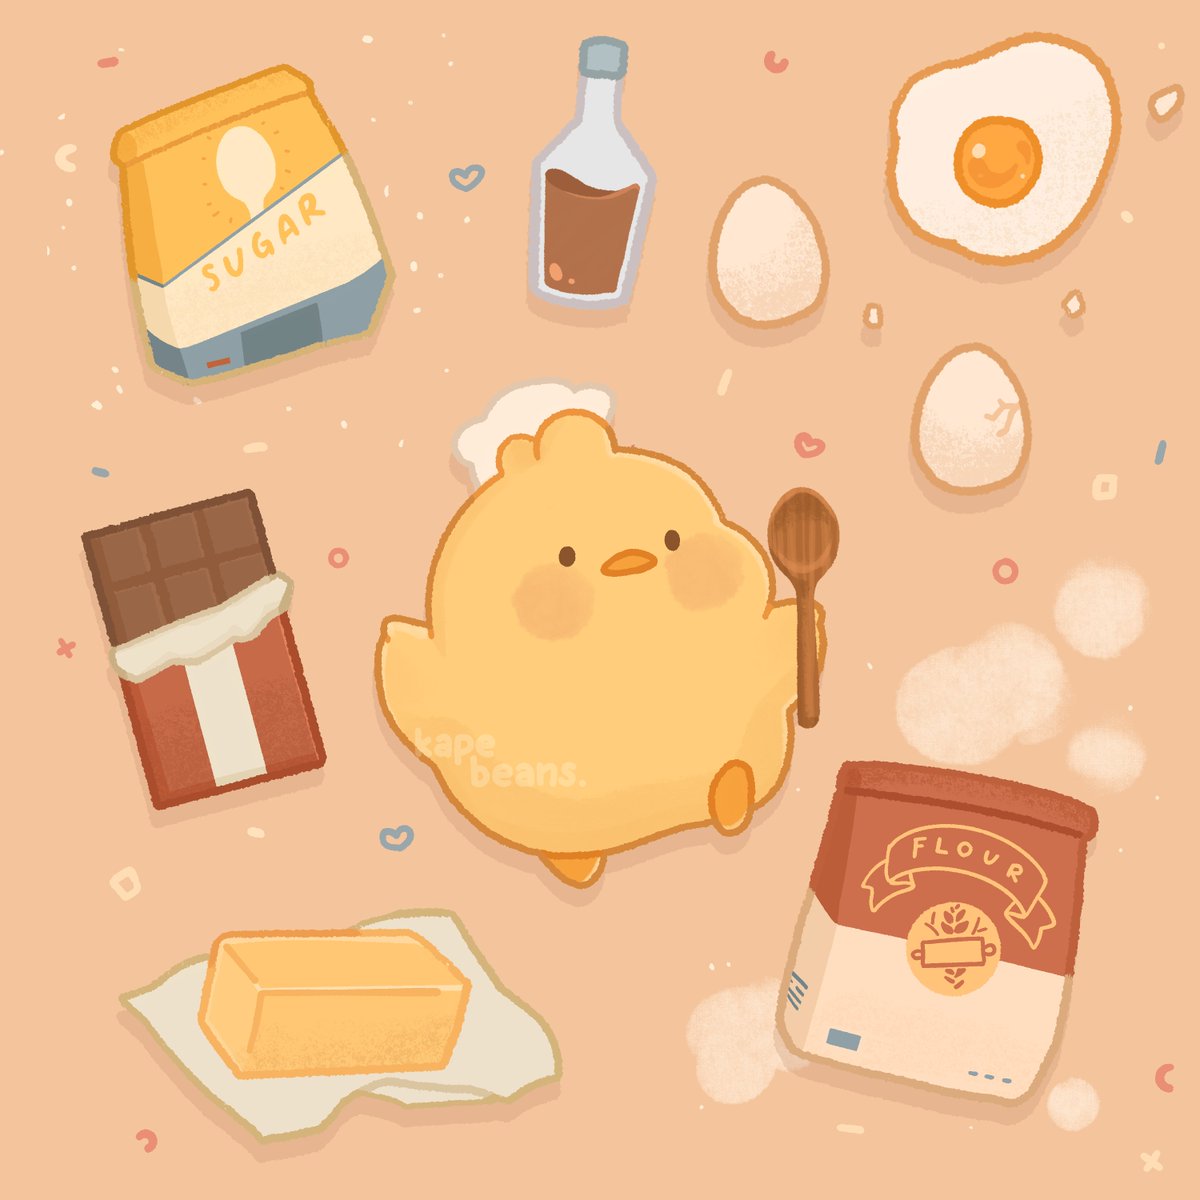 「what's he baking? ? 」|bib 🐥☕️のイラスト